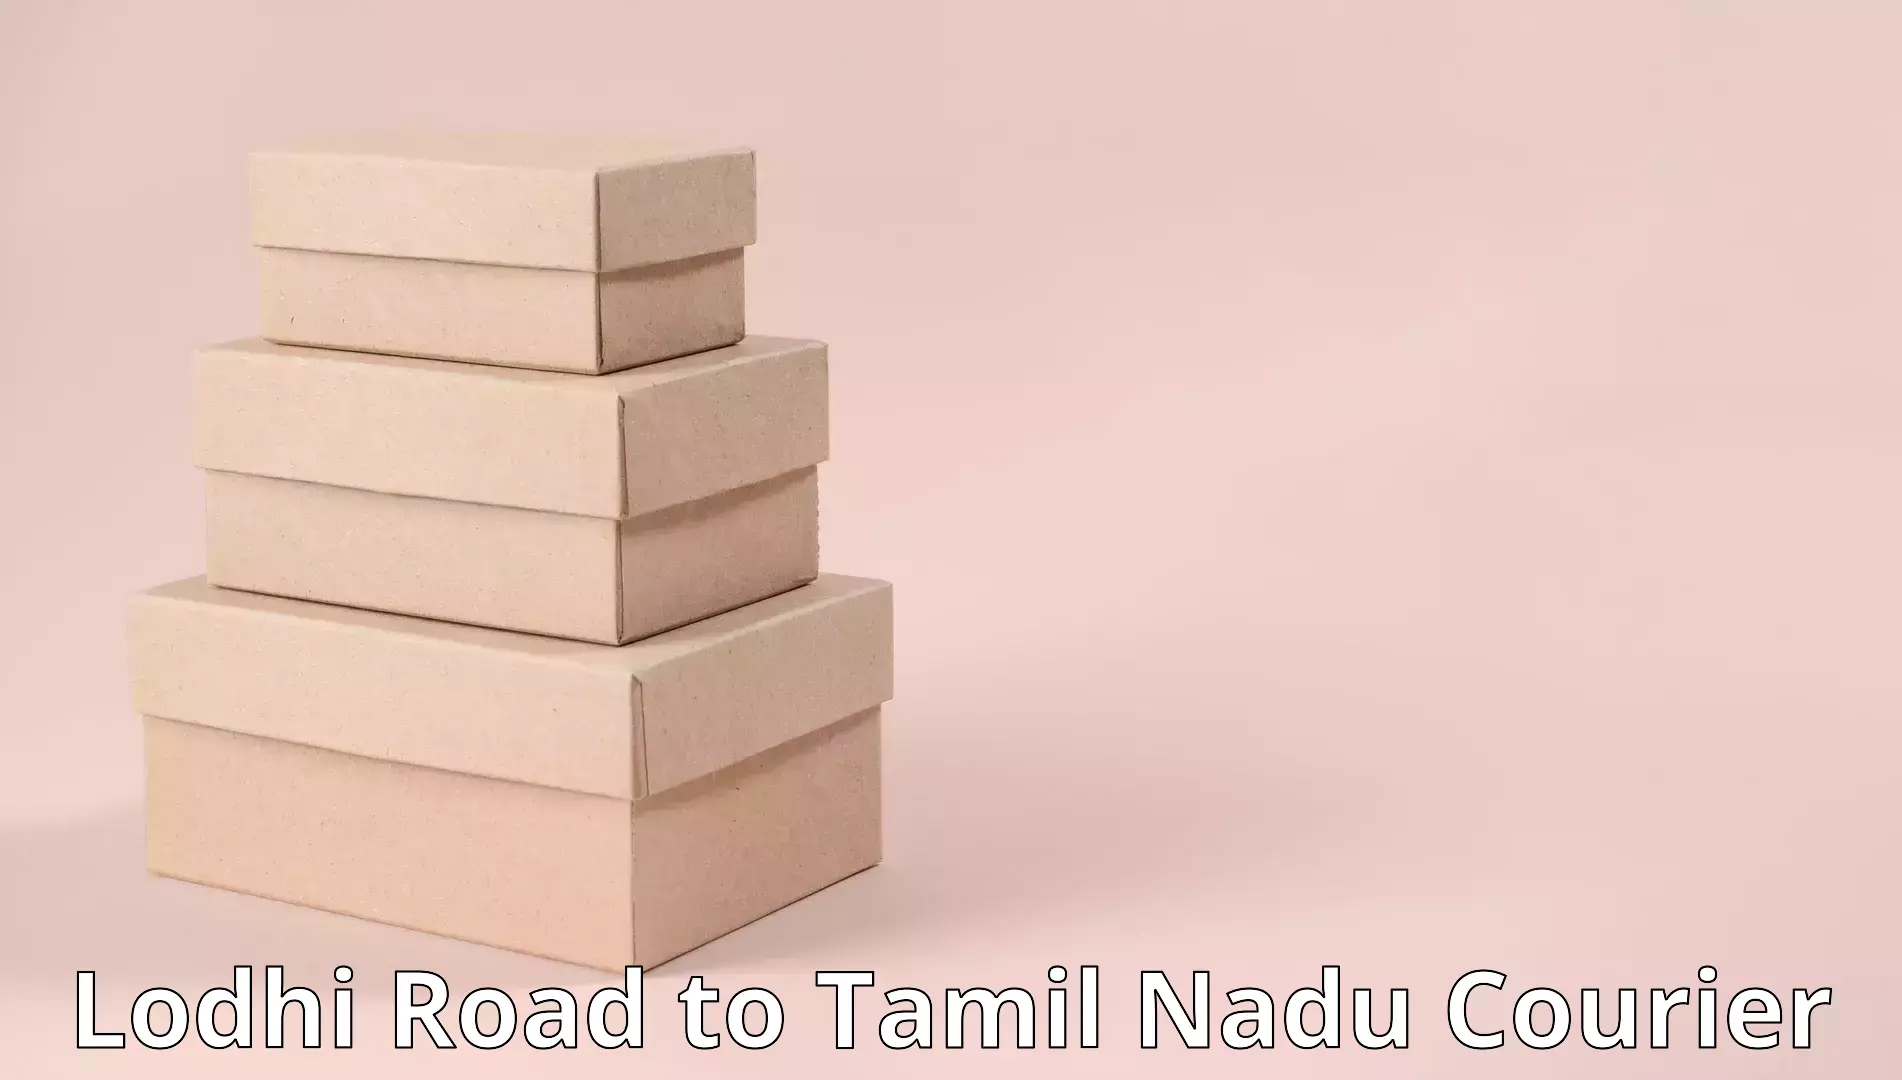 Furniture shipping services Lodhi Road to Tamil Nadu